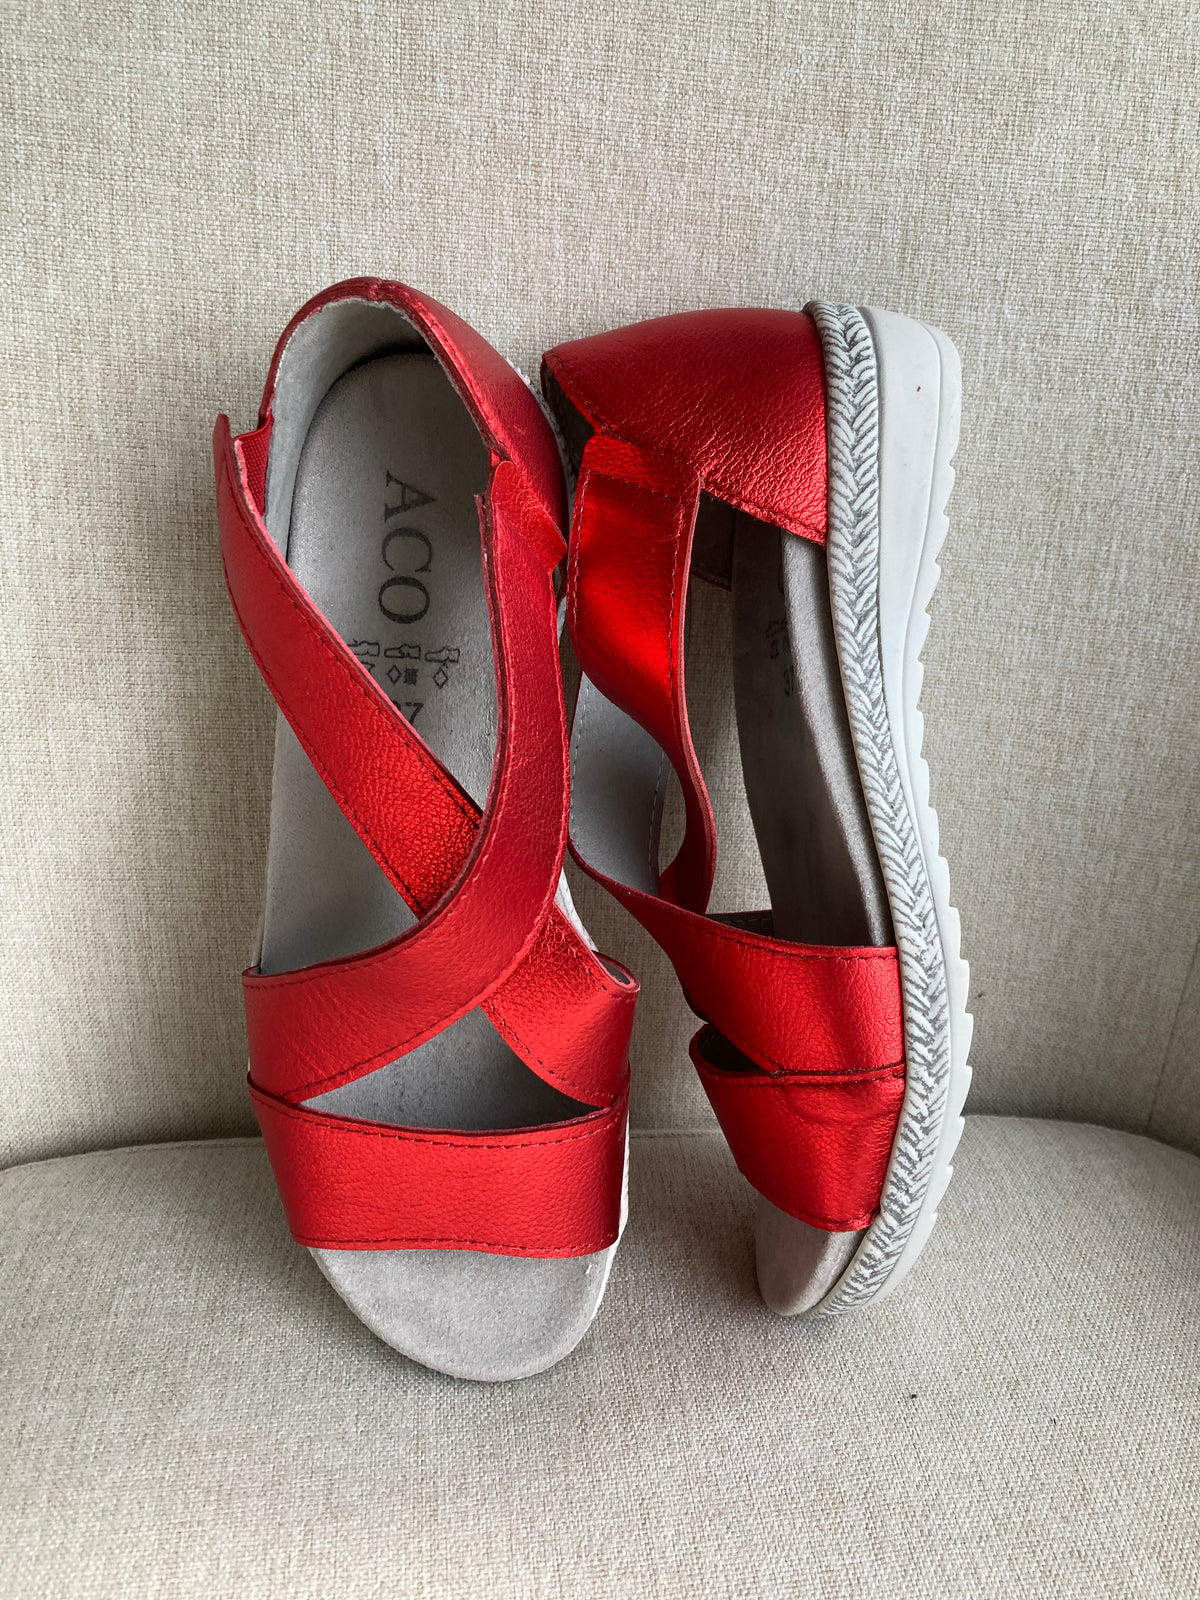 Red shimmery sandals by ACO